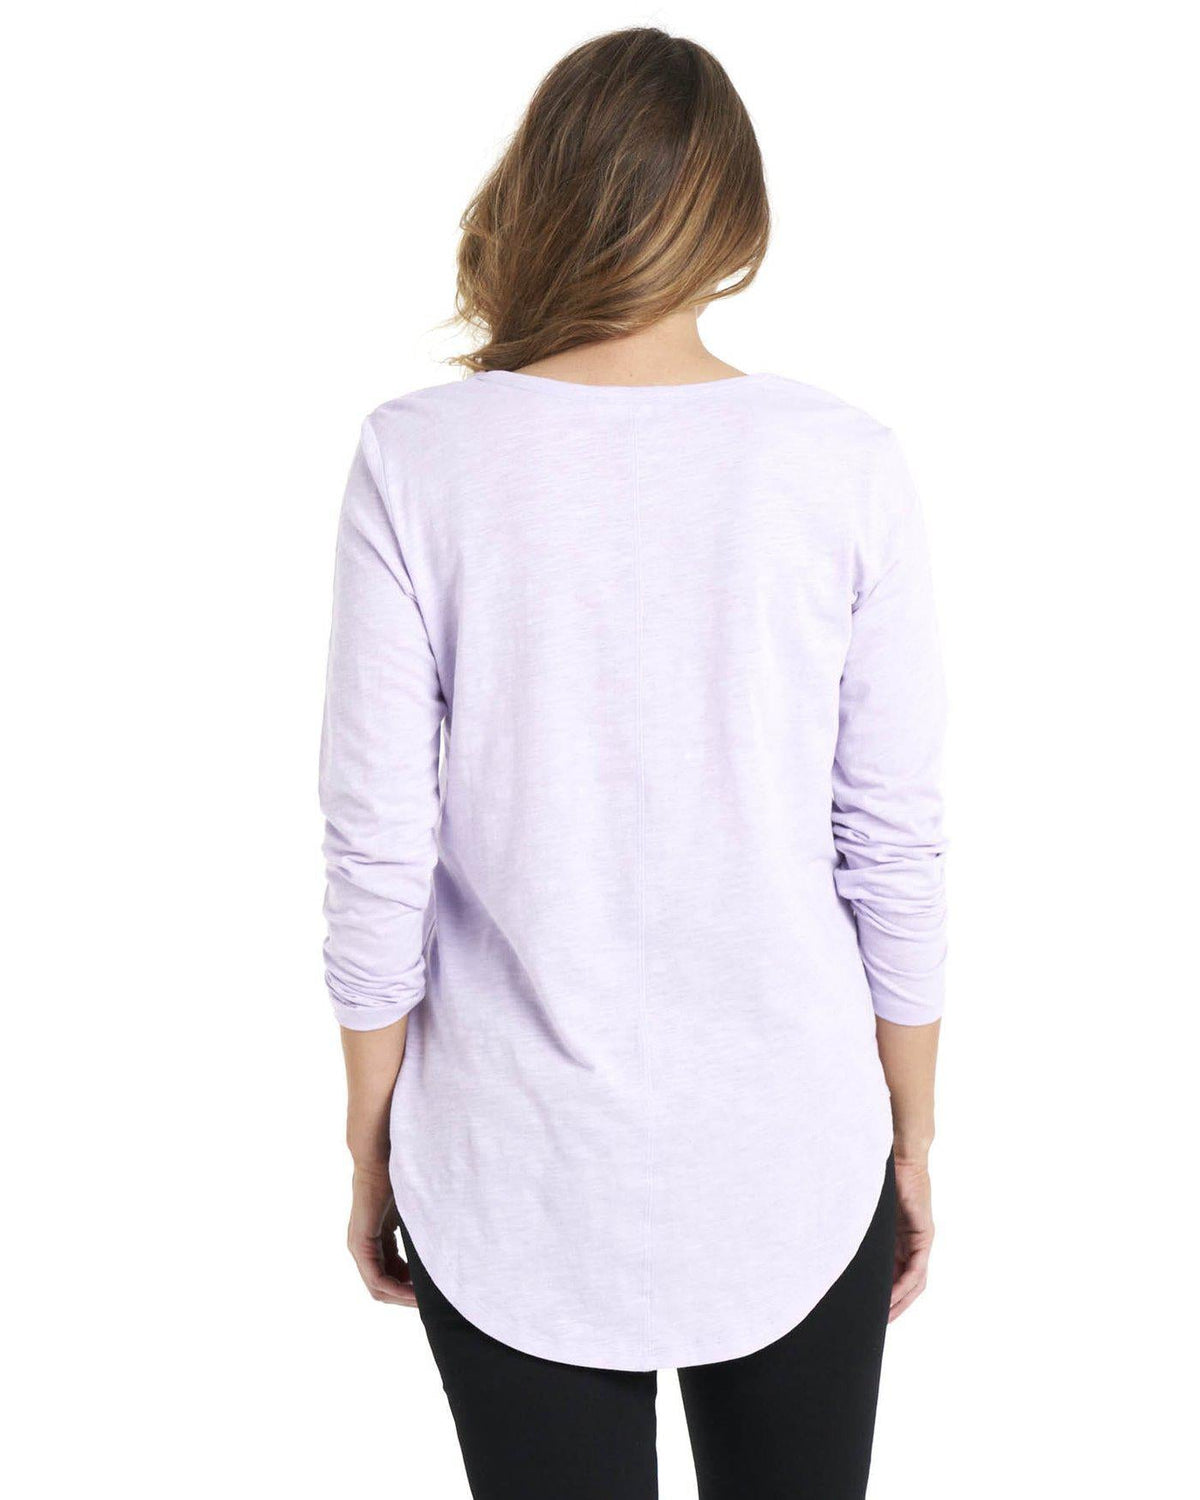 Megan Long Sleeve Top - Periwinkle - Betty Basics - FUDGE Gifts Home Lifestyle